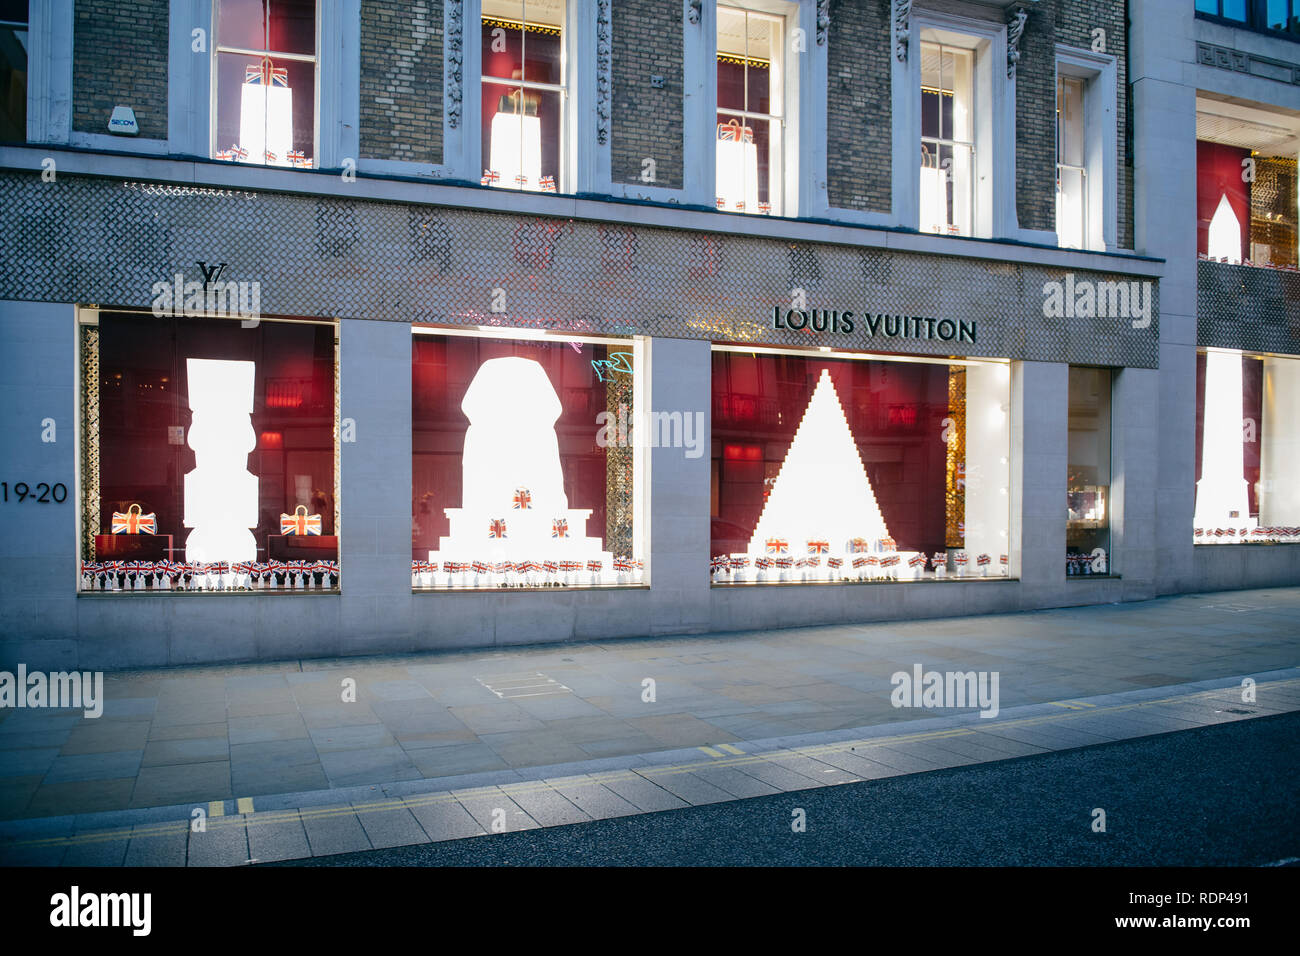 LONDON, UNITED KINGDOM MAY 18, 2018: Louis Vuitton celebrates the wedding of Prince Harry and Ms Meghan Markle with animated British Union Jack flags in their storefront flagship Stock Photo - Alamy